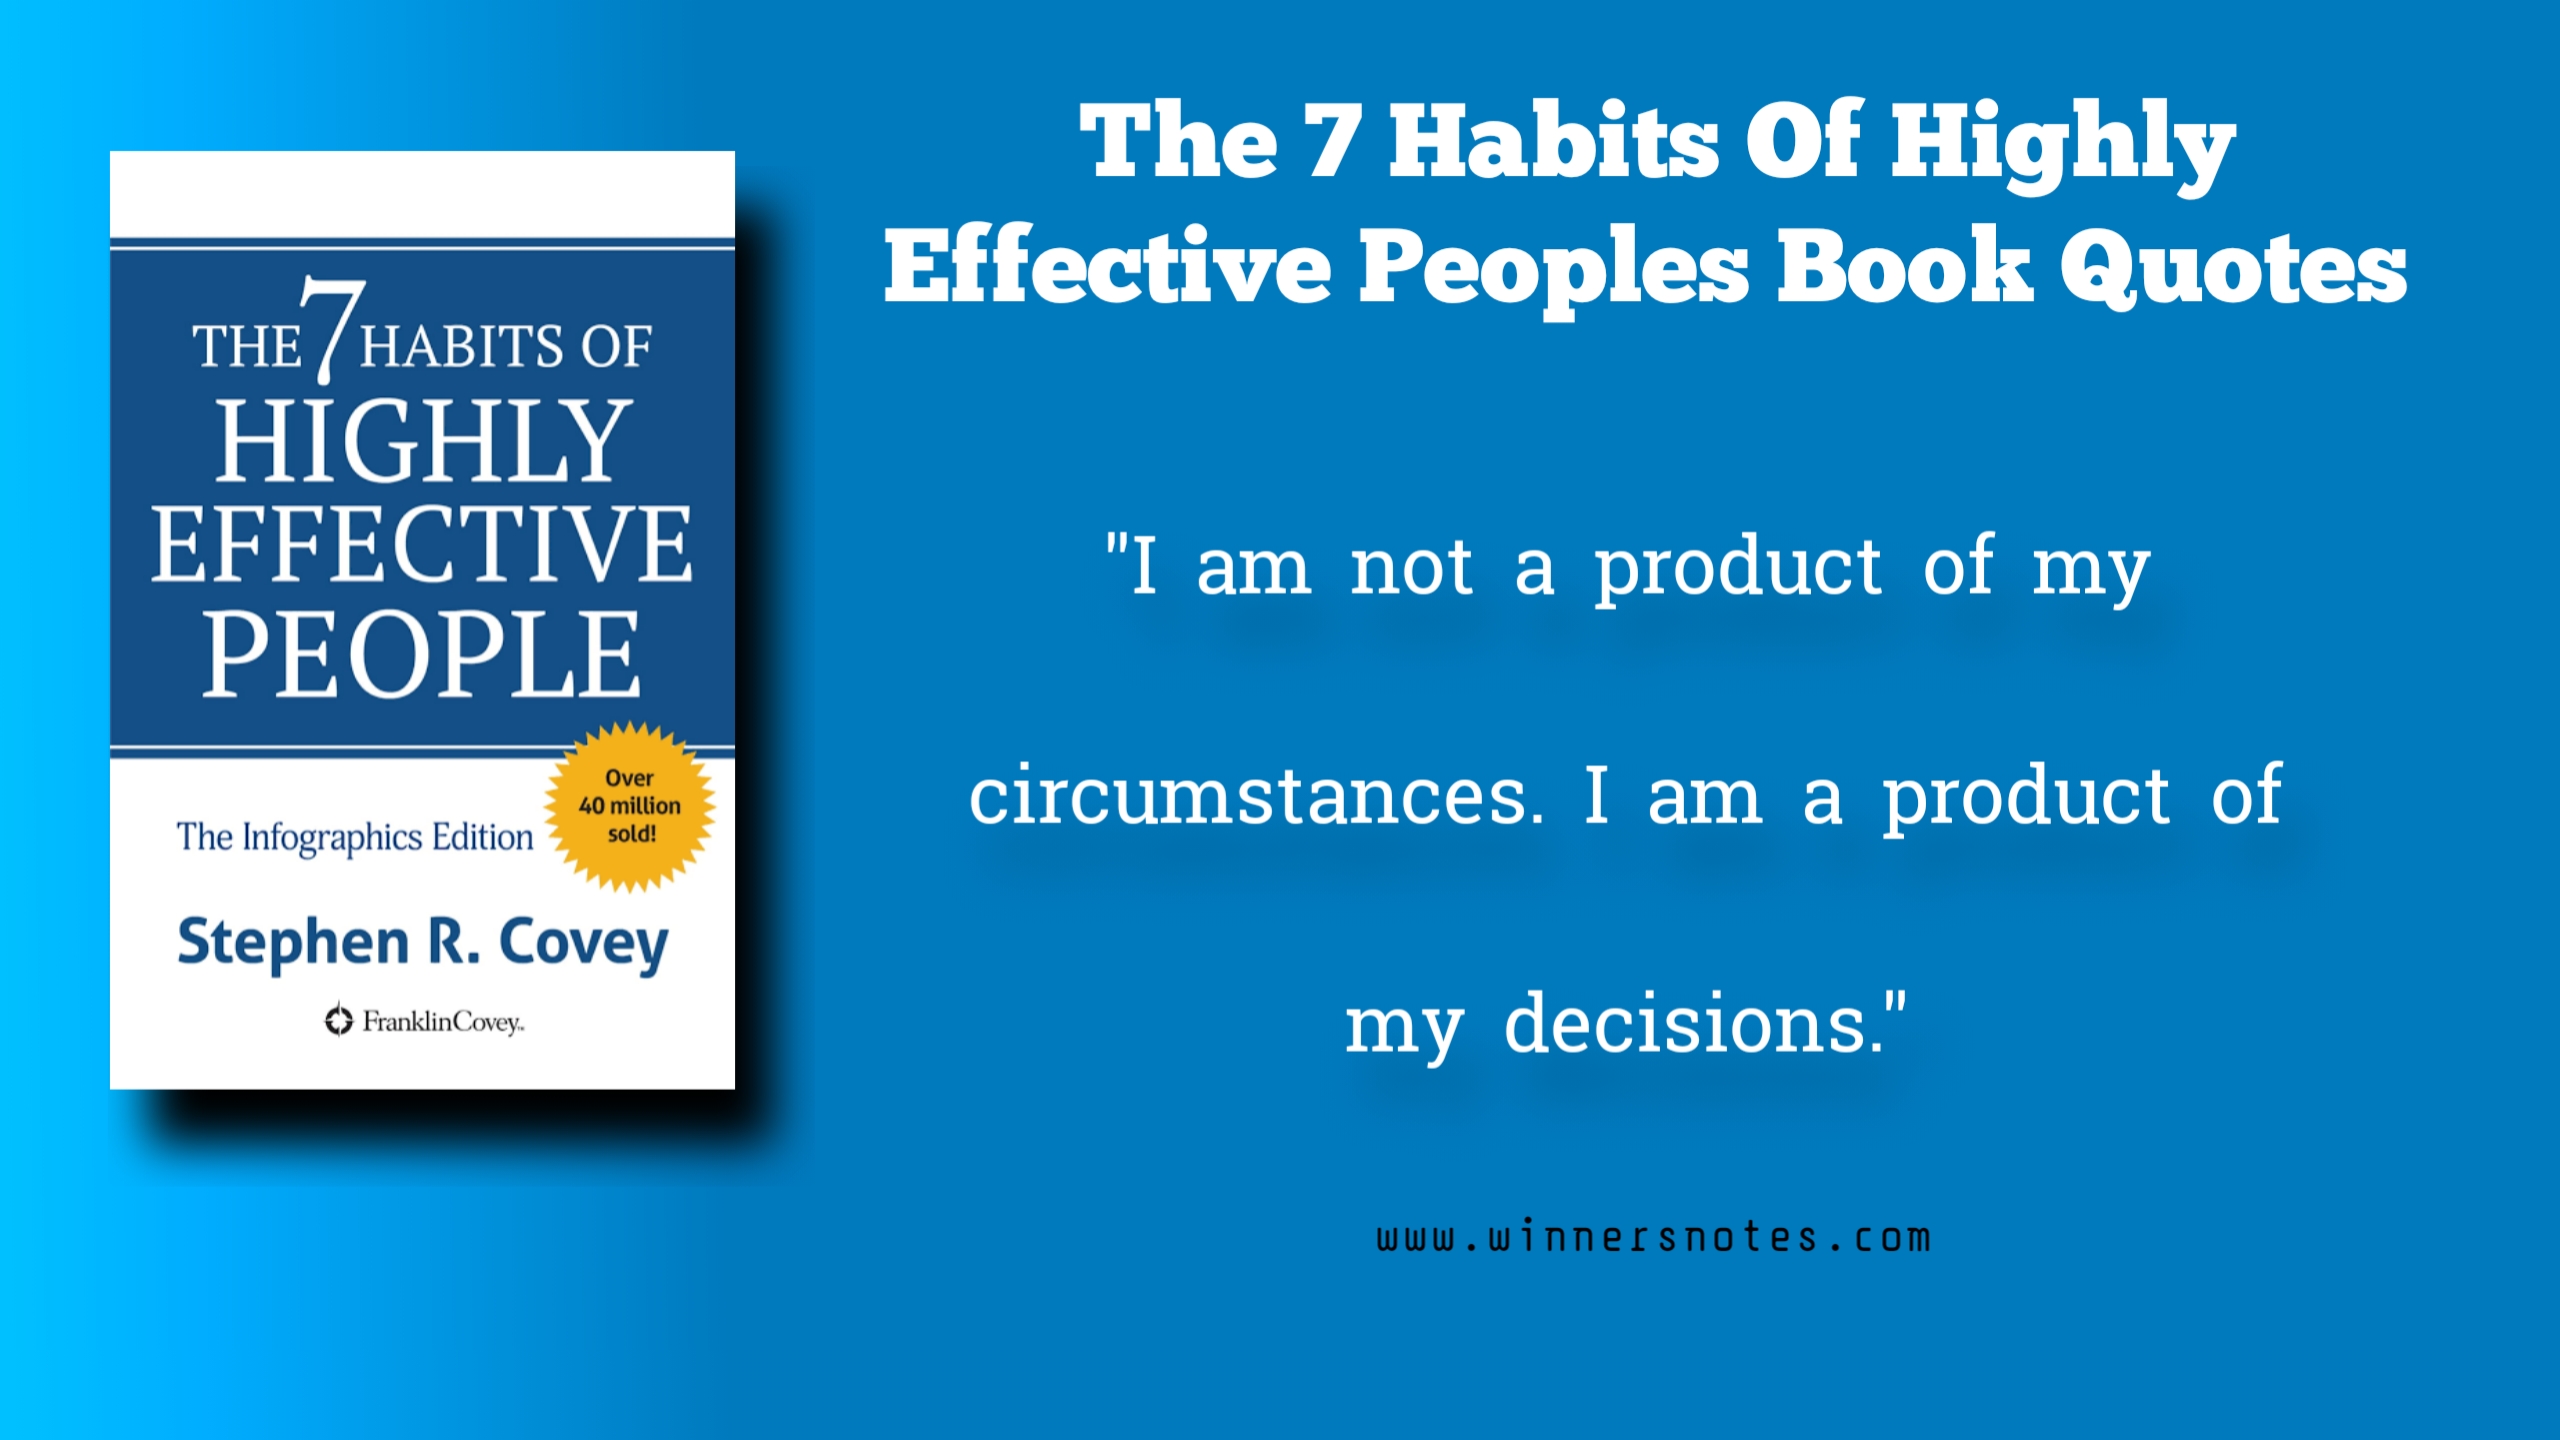 the 7 Habits of highly effective people book quotes